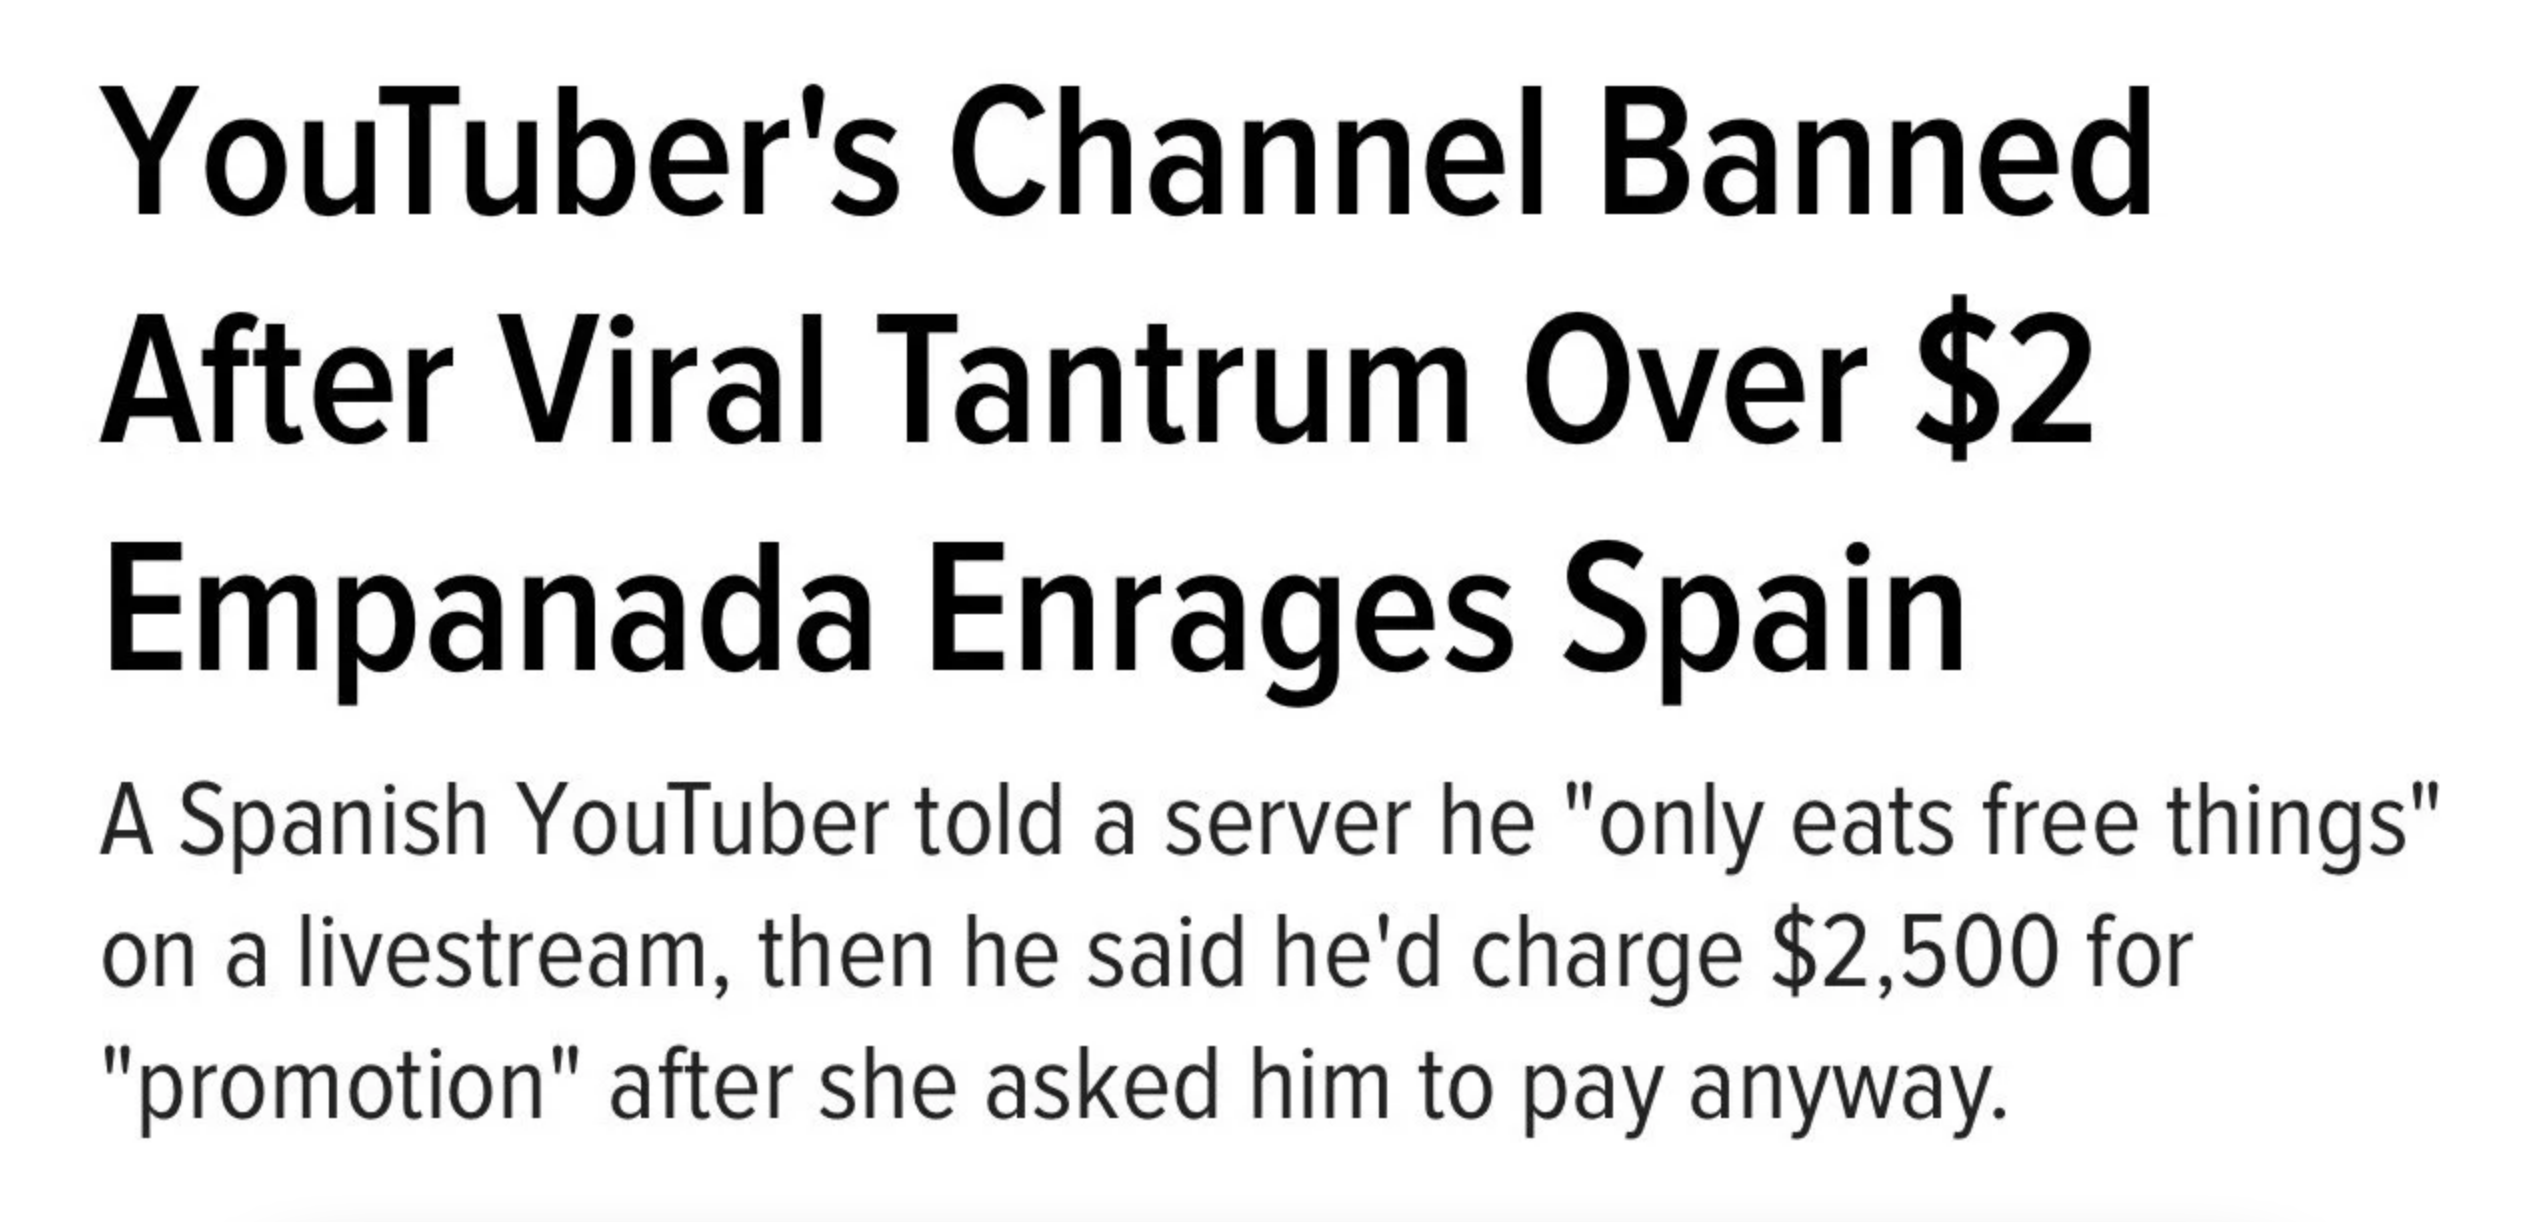 &quot;YouTuber&#x27;s Channel Banned After Viral Tantrum Over $2 Empanada Enrages Spain&quot;